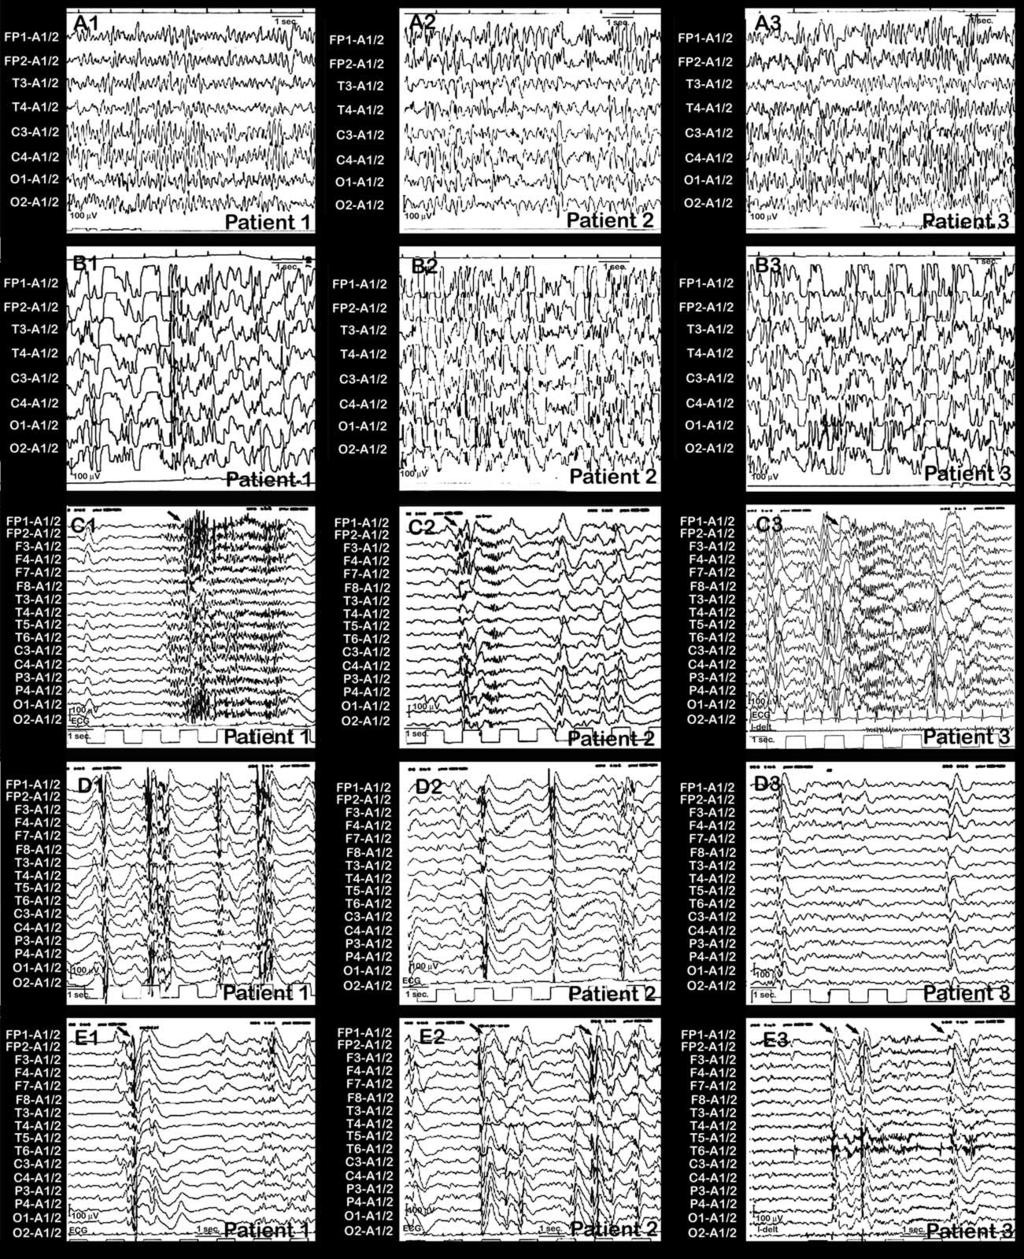 S. Buoni et al. / Clinical Neurophysiology 117 (2006) 223 227 225 Fig. 1. EEGs from patients 1, 2, and 3. Note the presence of the several patterns characterizing the early myoclonic encephalopathy.